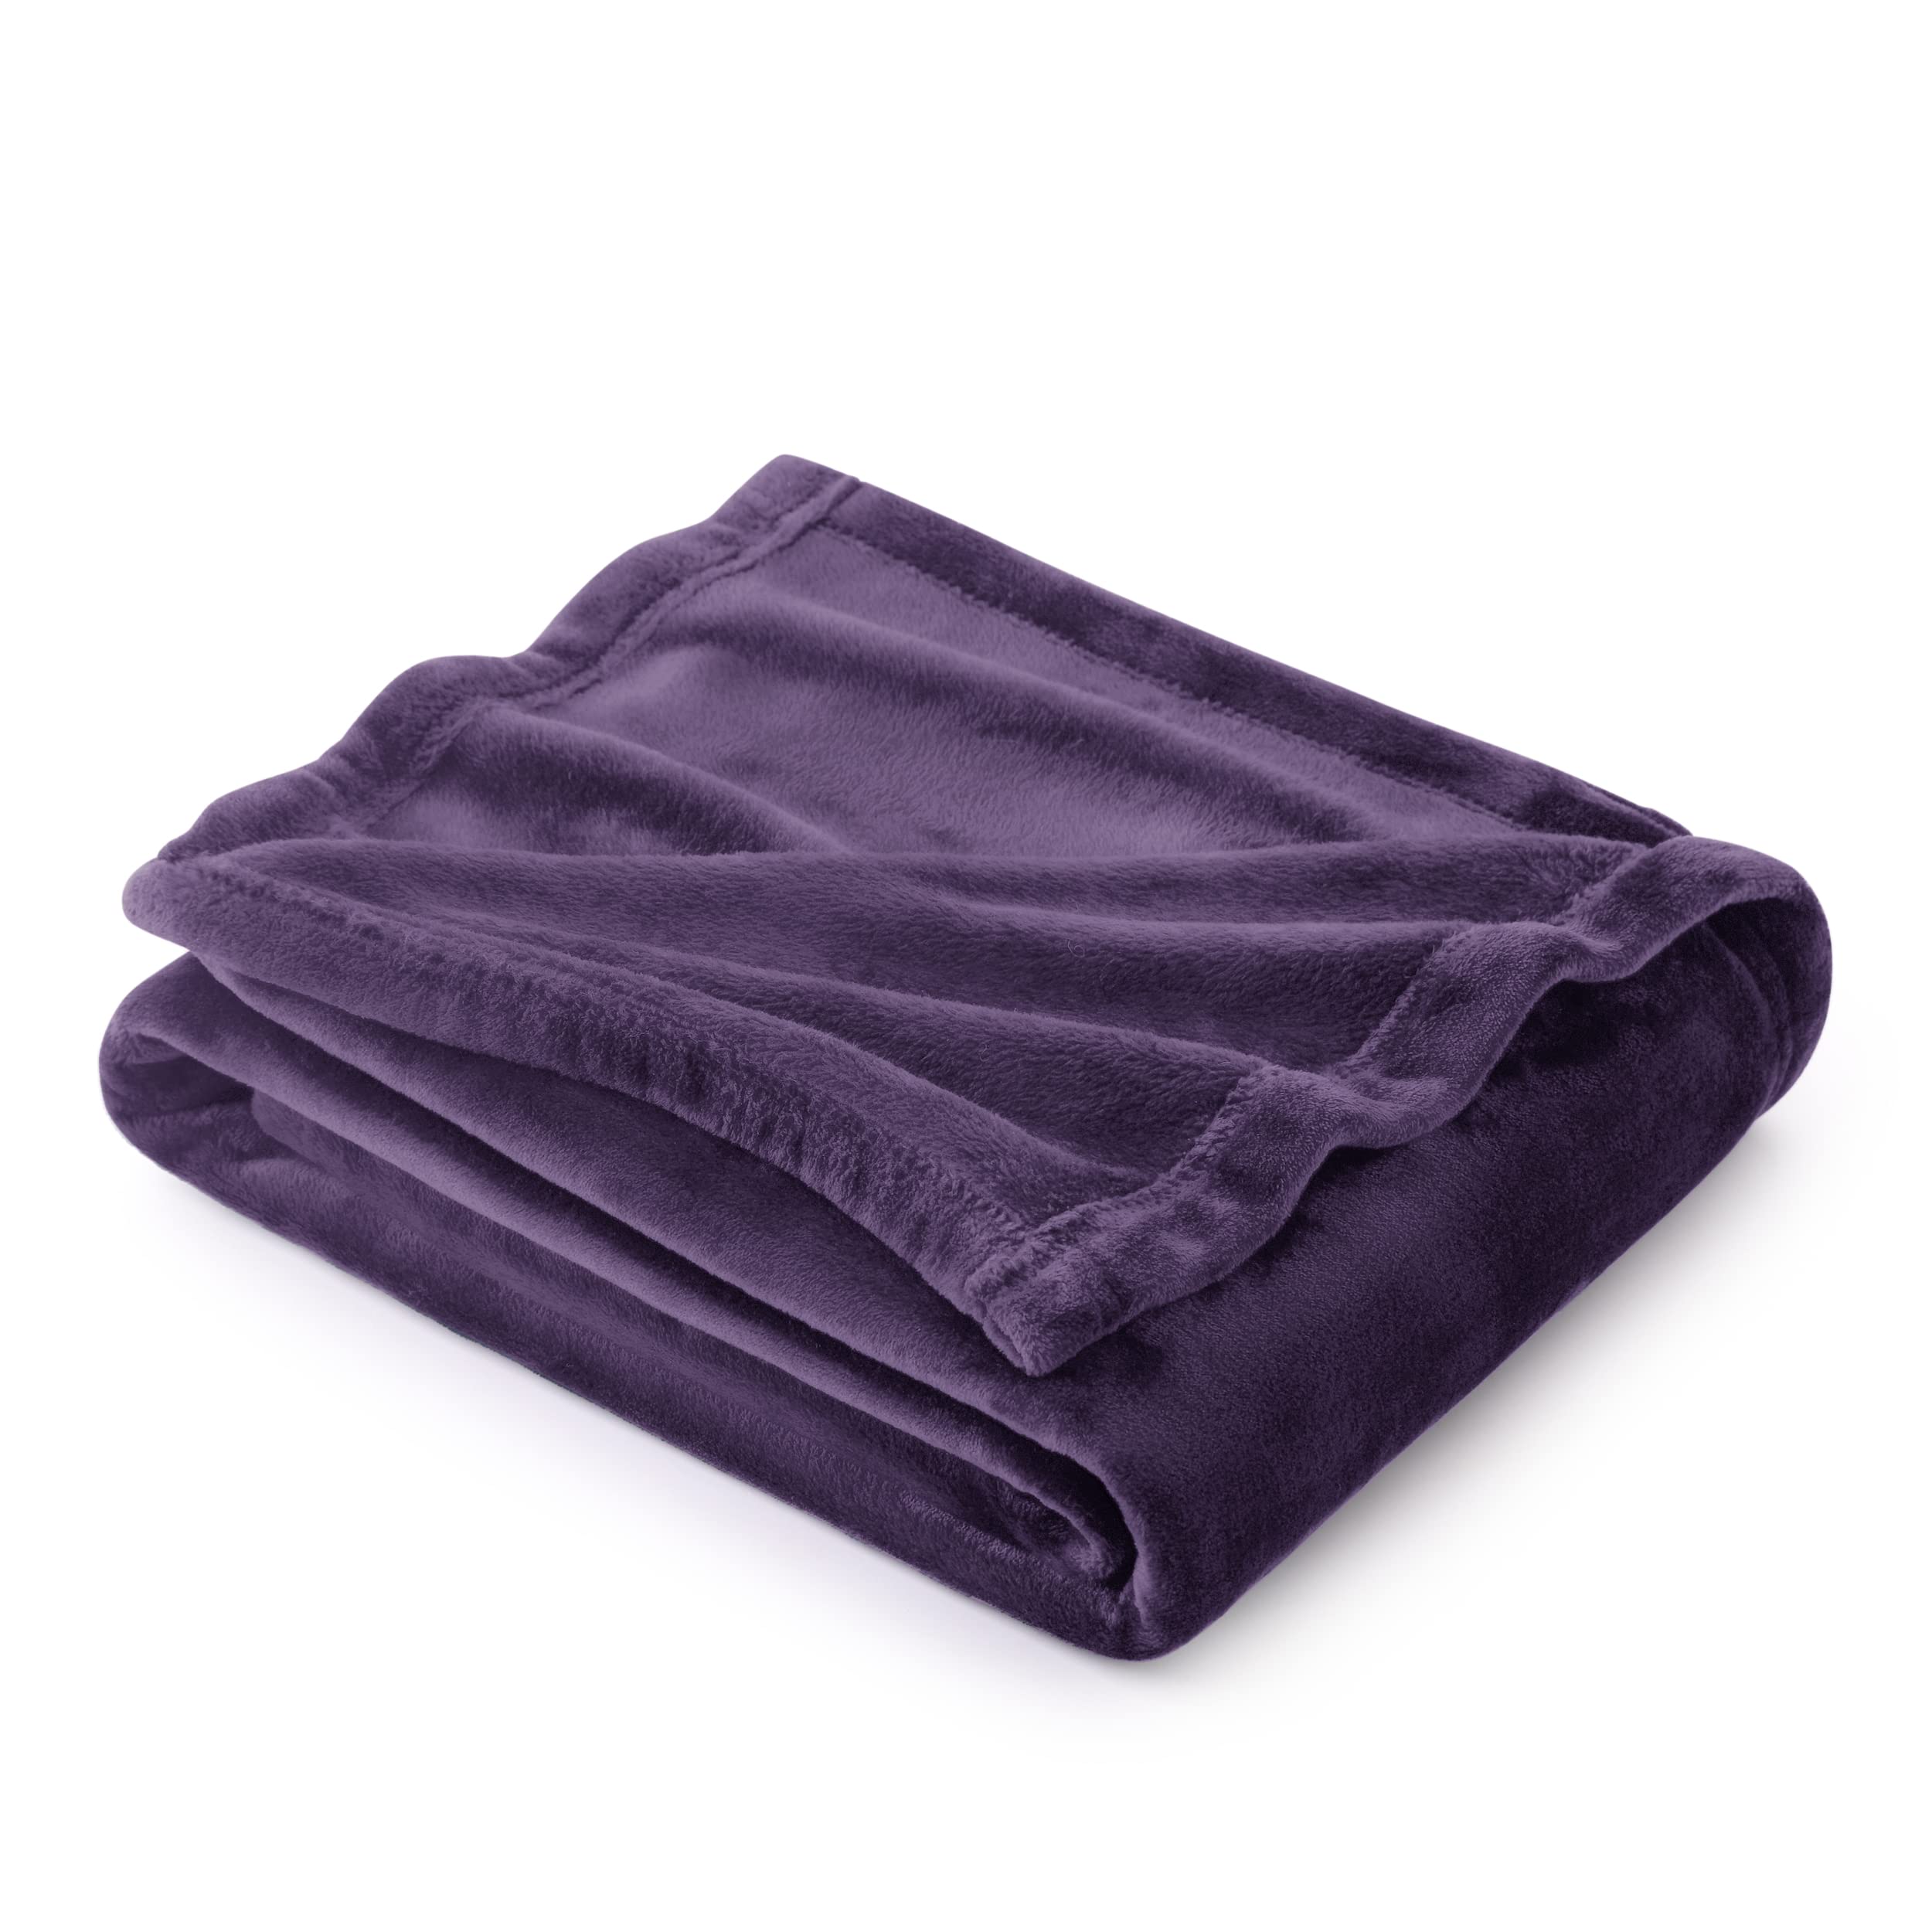 Book Cover Bedsure Fleece Blanket Twin Blanket Purple - 300GSM Soft Lightweight Plush Cozy Twin Blankets for Bed, Sofa, Couch, Travel, Camping, 60x80 inches Twin (60